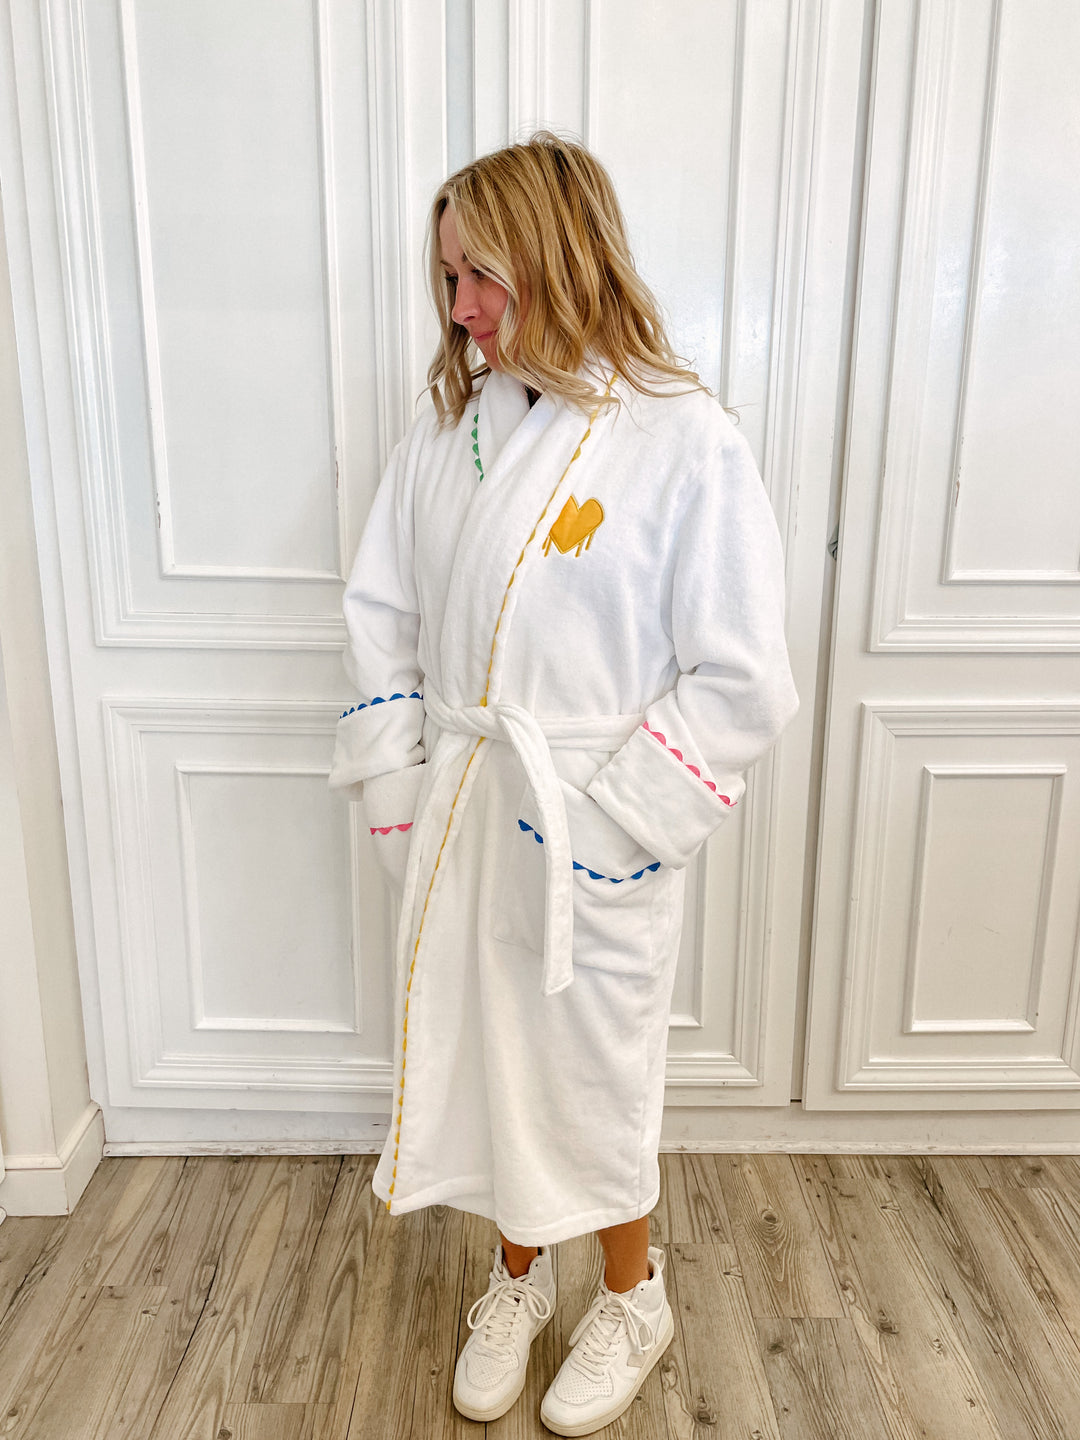 Kerri Rosenthal - The Funday Robe in New White